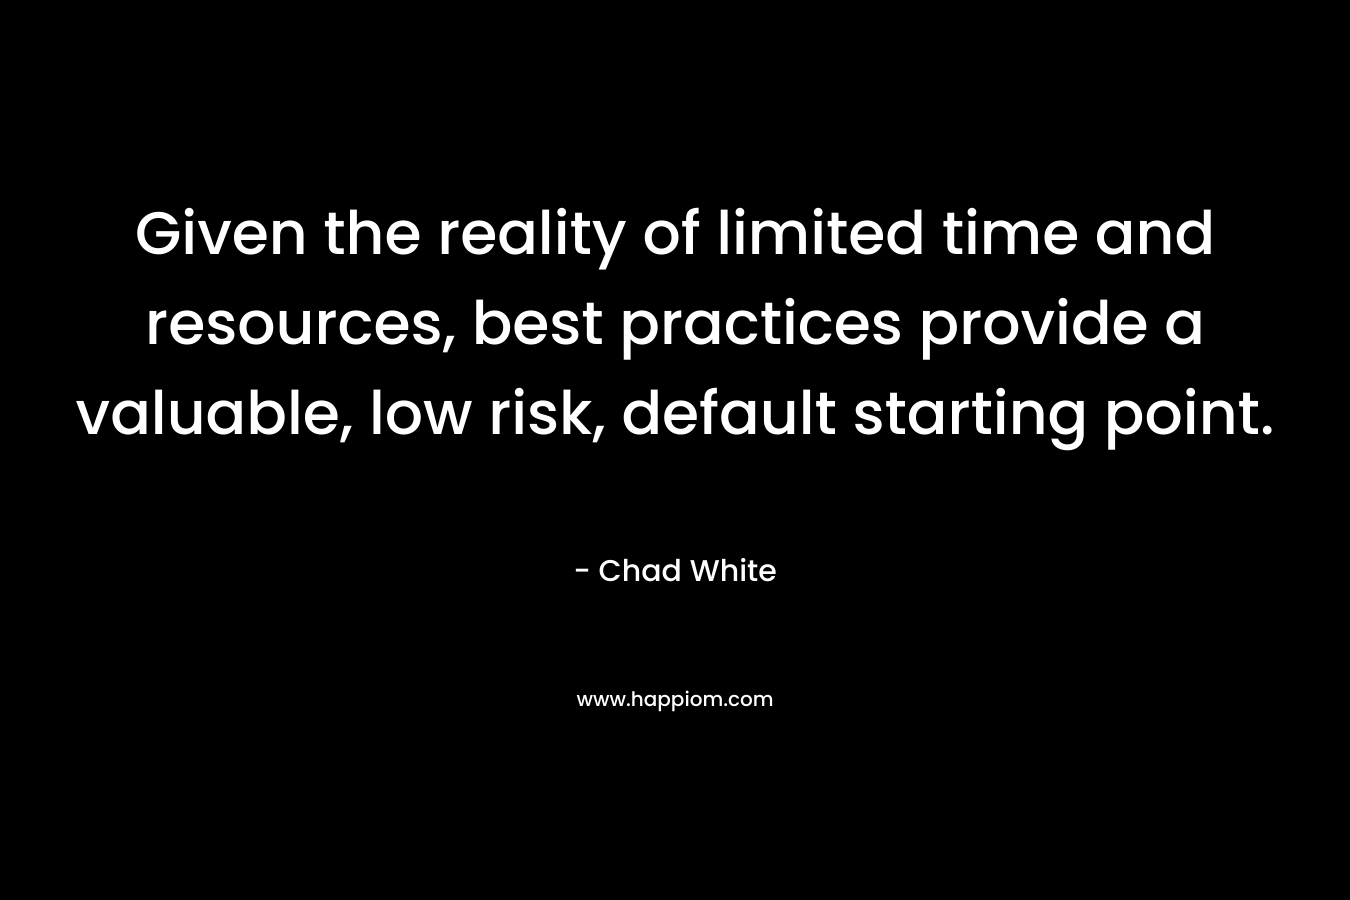 Given the reality of limited time and resources, best practices provide a valuable, low risk, default starting point. – Chad White